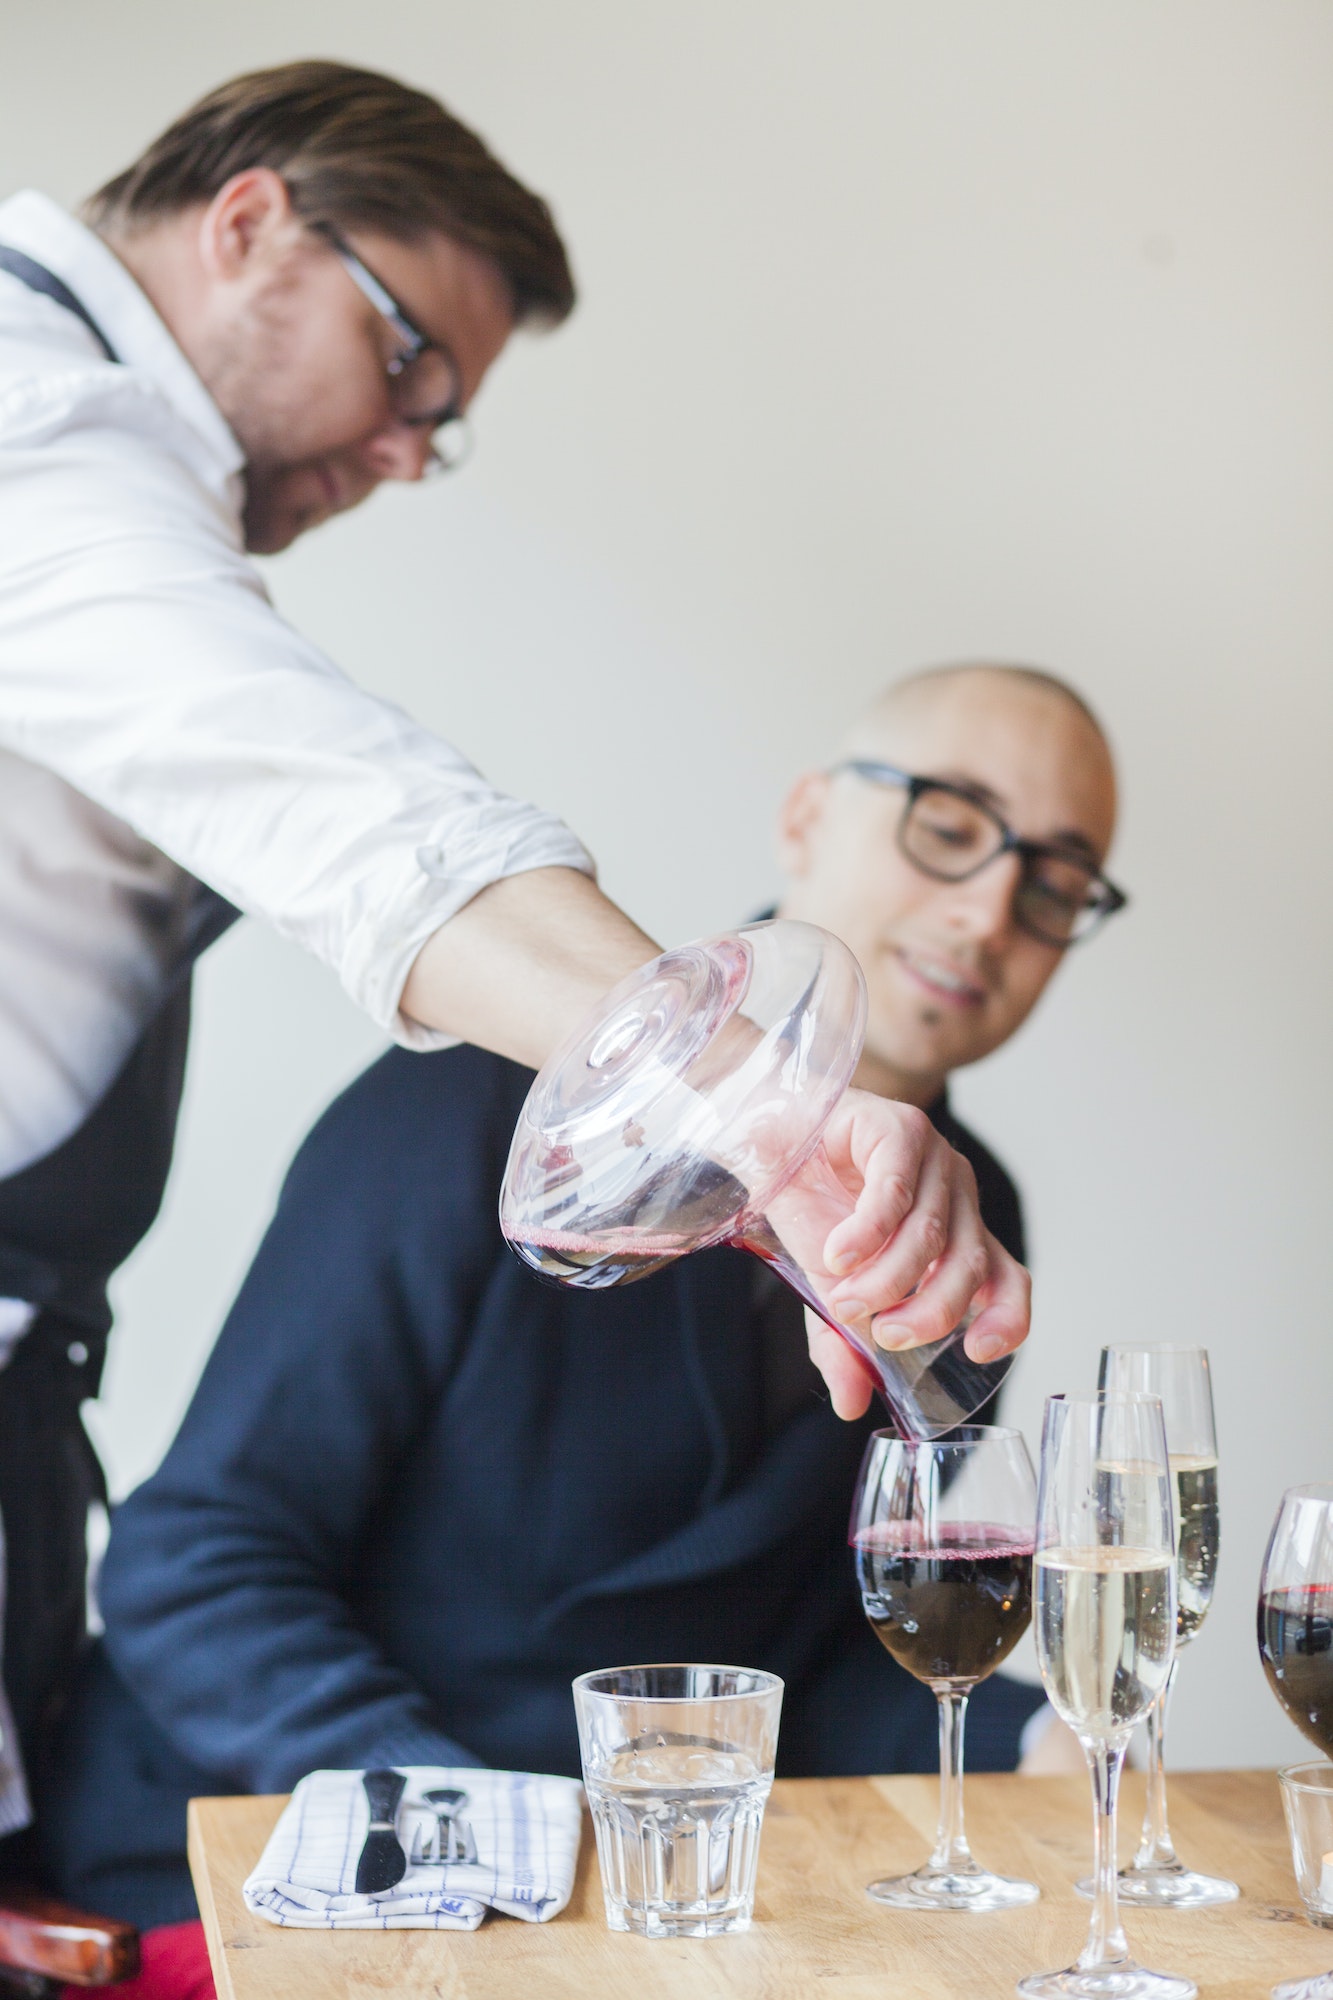 Chef serving red wine to customer in restaurant